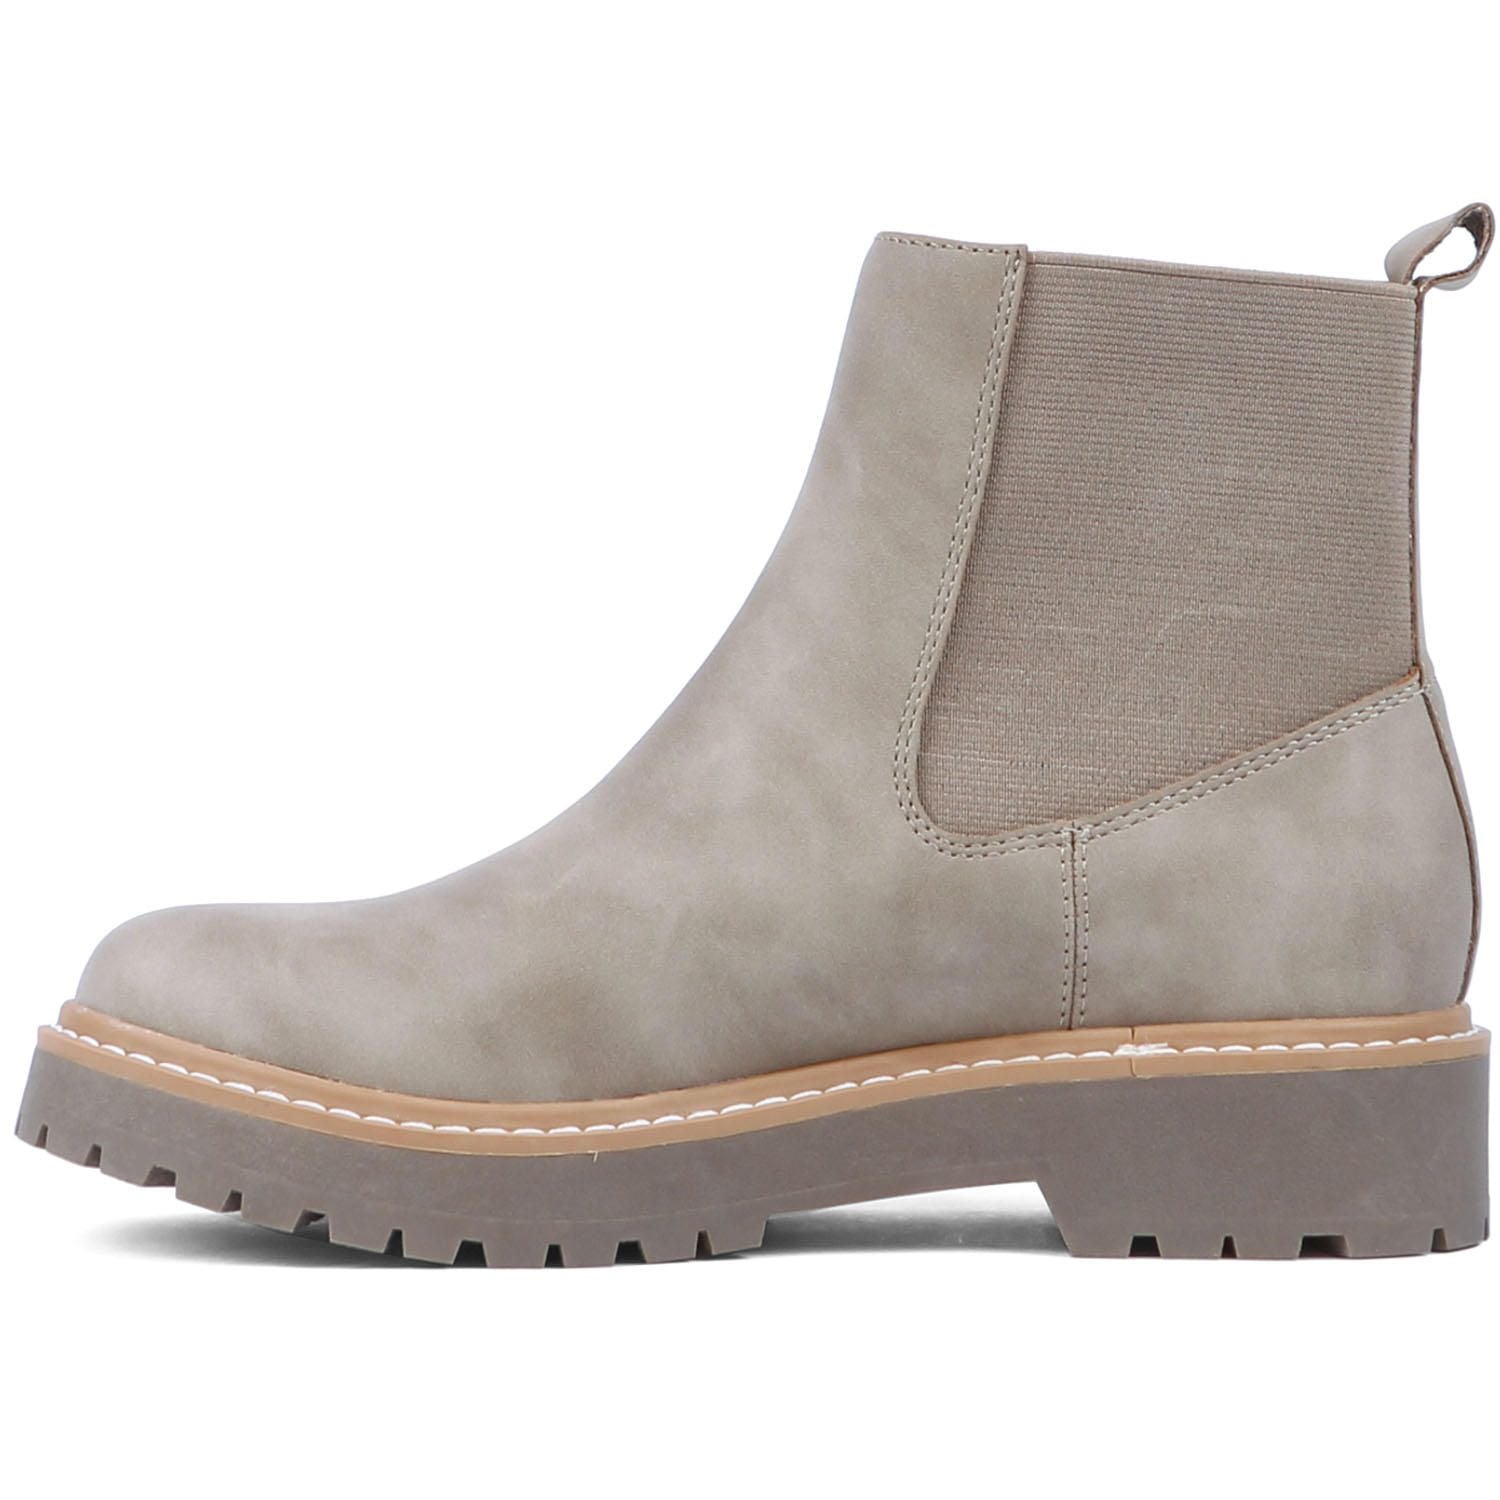 DV by Dolce Vita Women'ss Lobera Chelsea Boot, Taupe 6